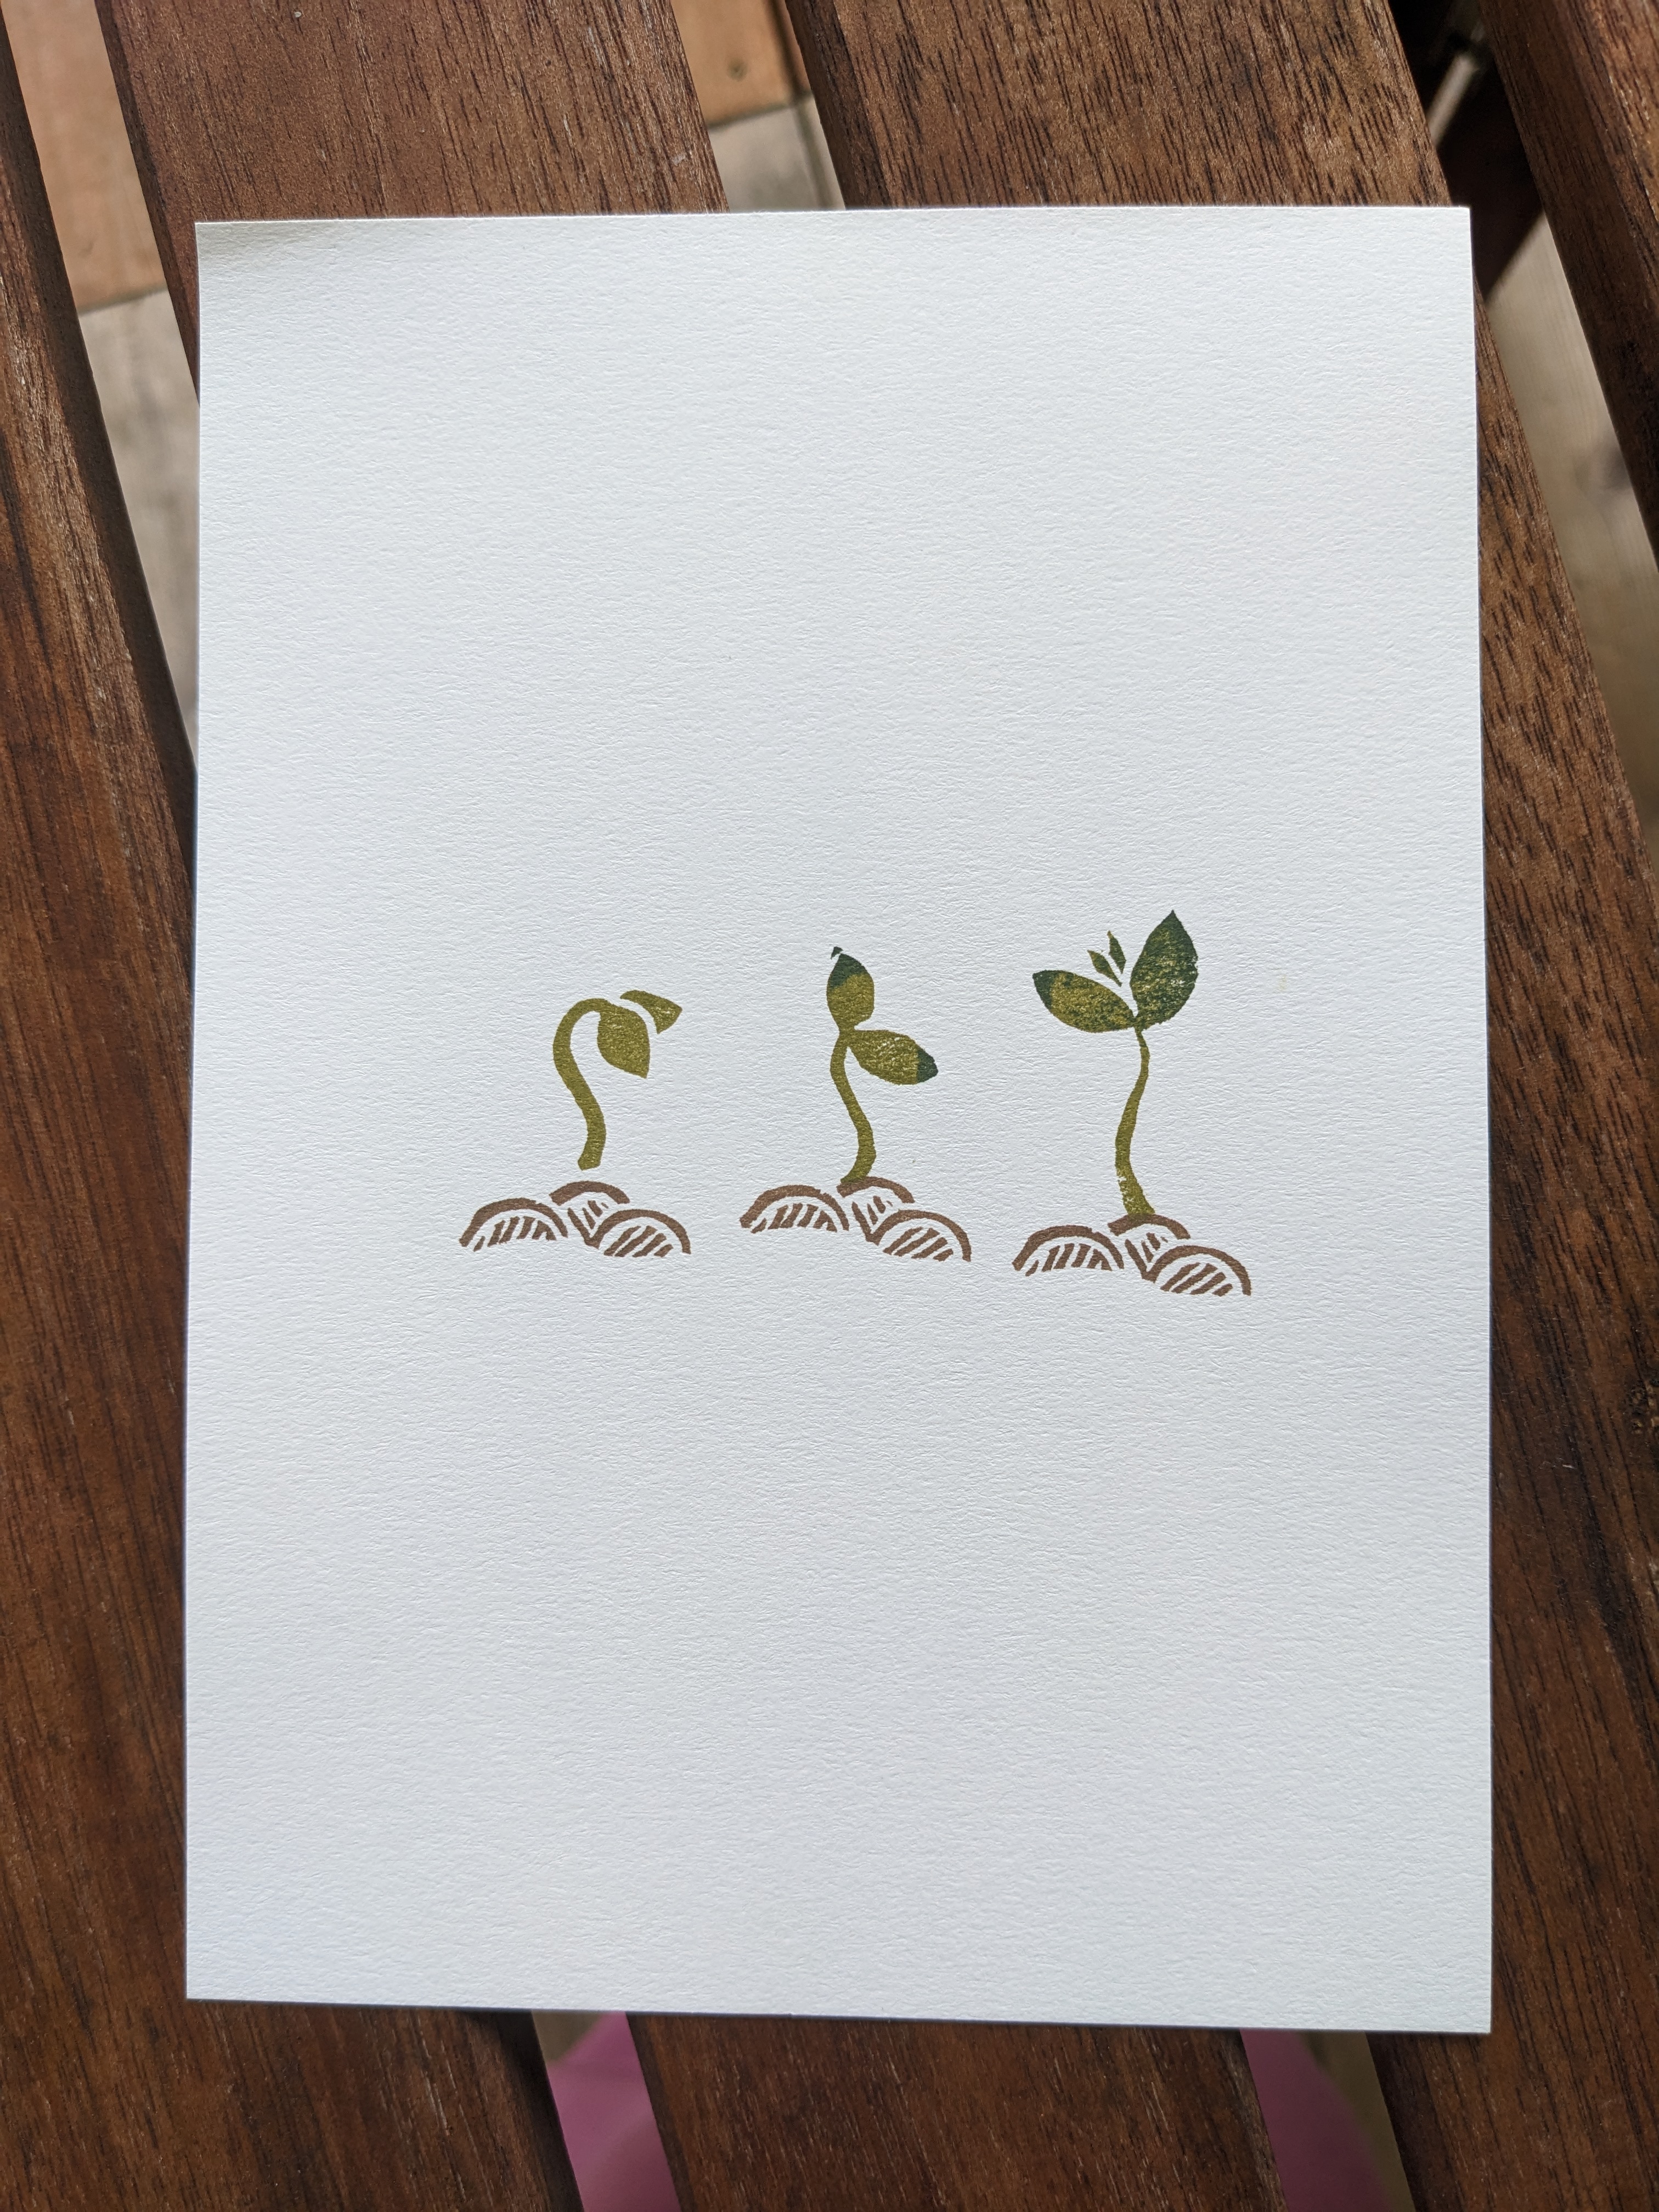 A print of a 3-stage design of a green seedling barely open, starting to straighten up, and growing strong, with little piles of dirt beneath each one.